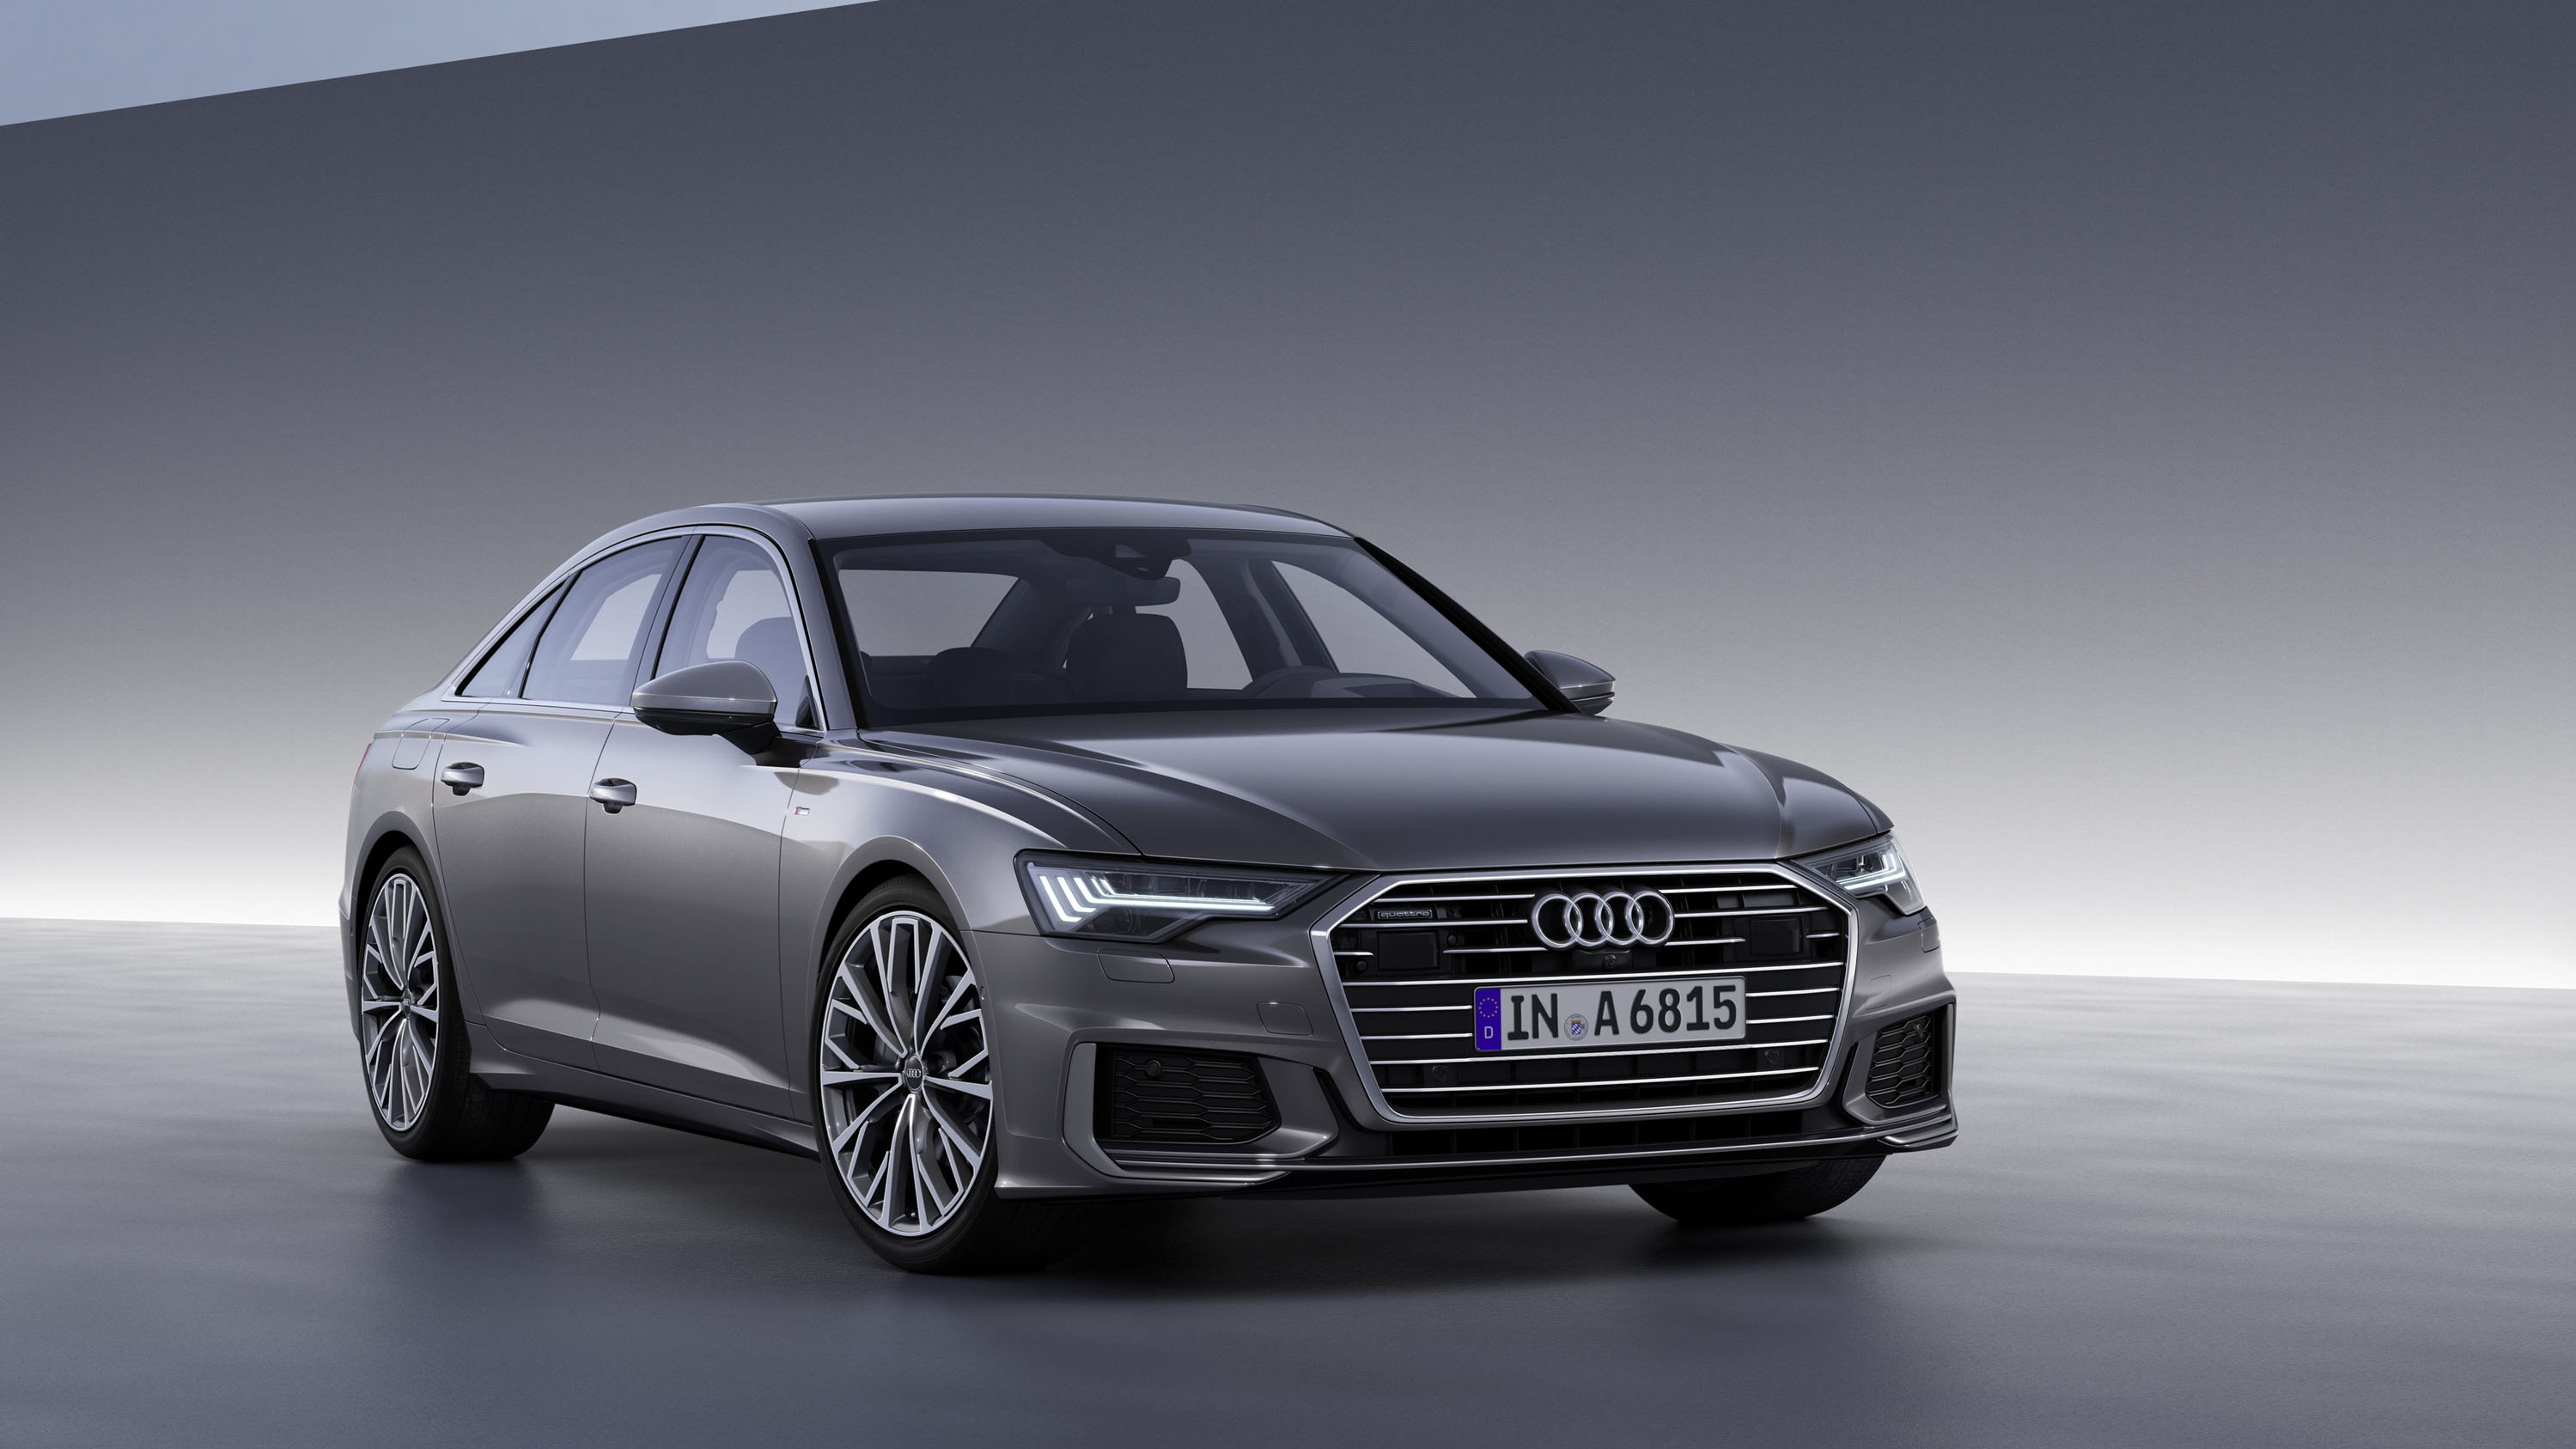 2019 Audi A6 Review, Ratings, Specs, Prices, and Photos - The Car Connection2999 x 1687